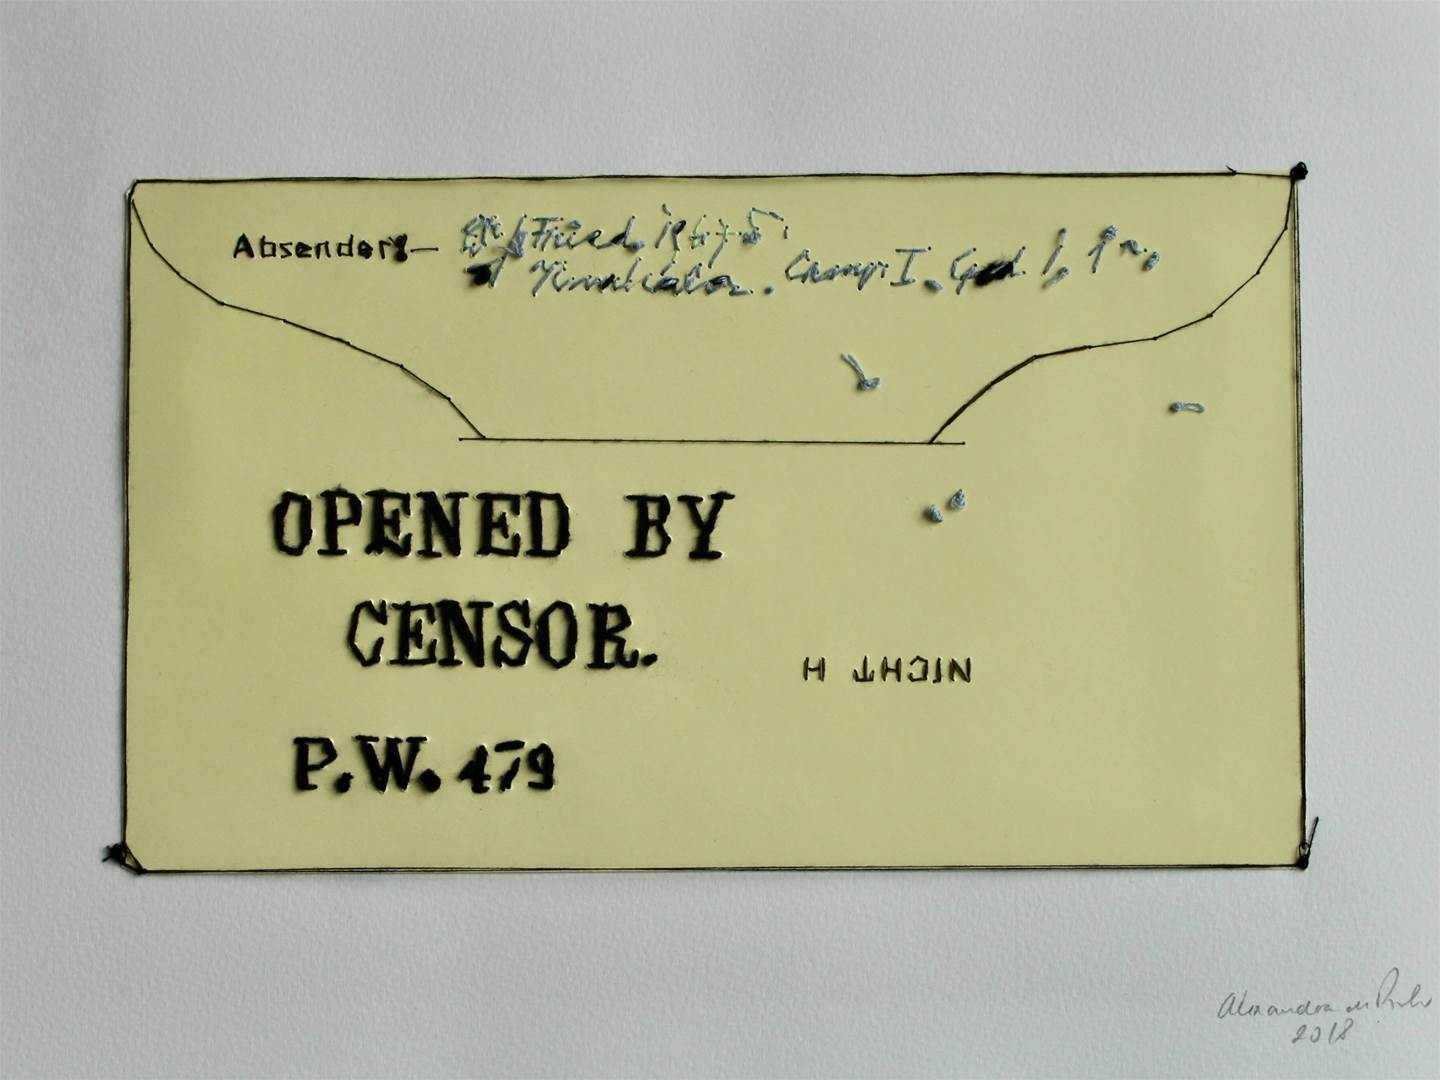 Openend by censor, original   Drawing and Illustration by Alexandra de Pinho